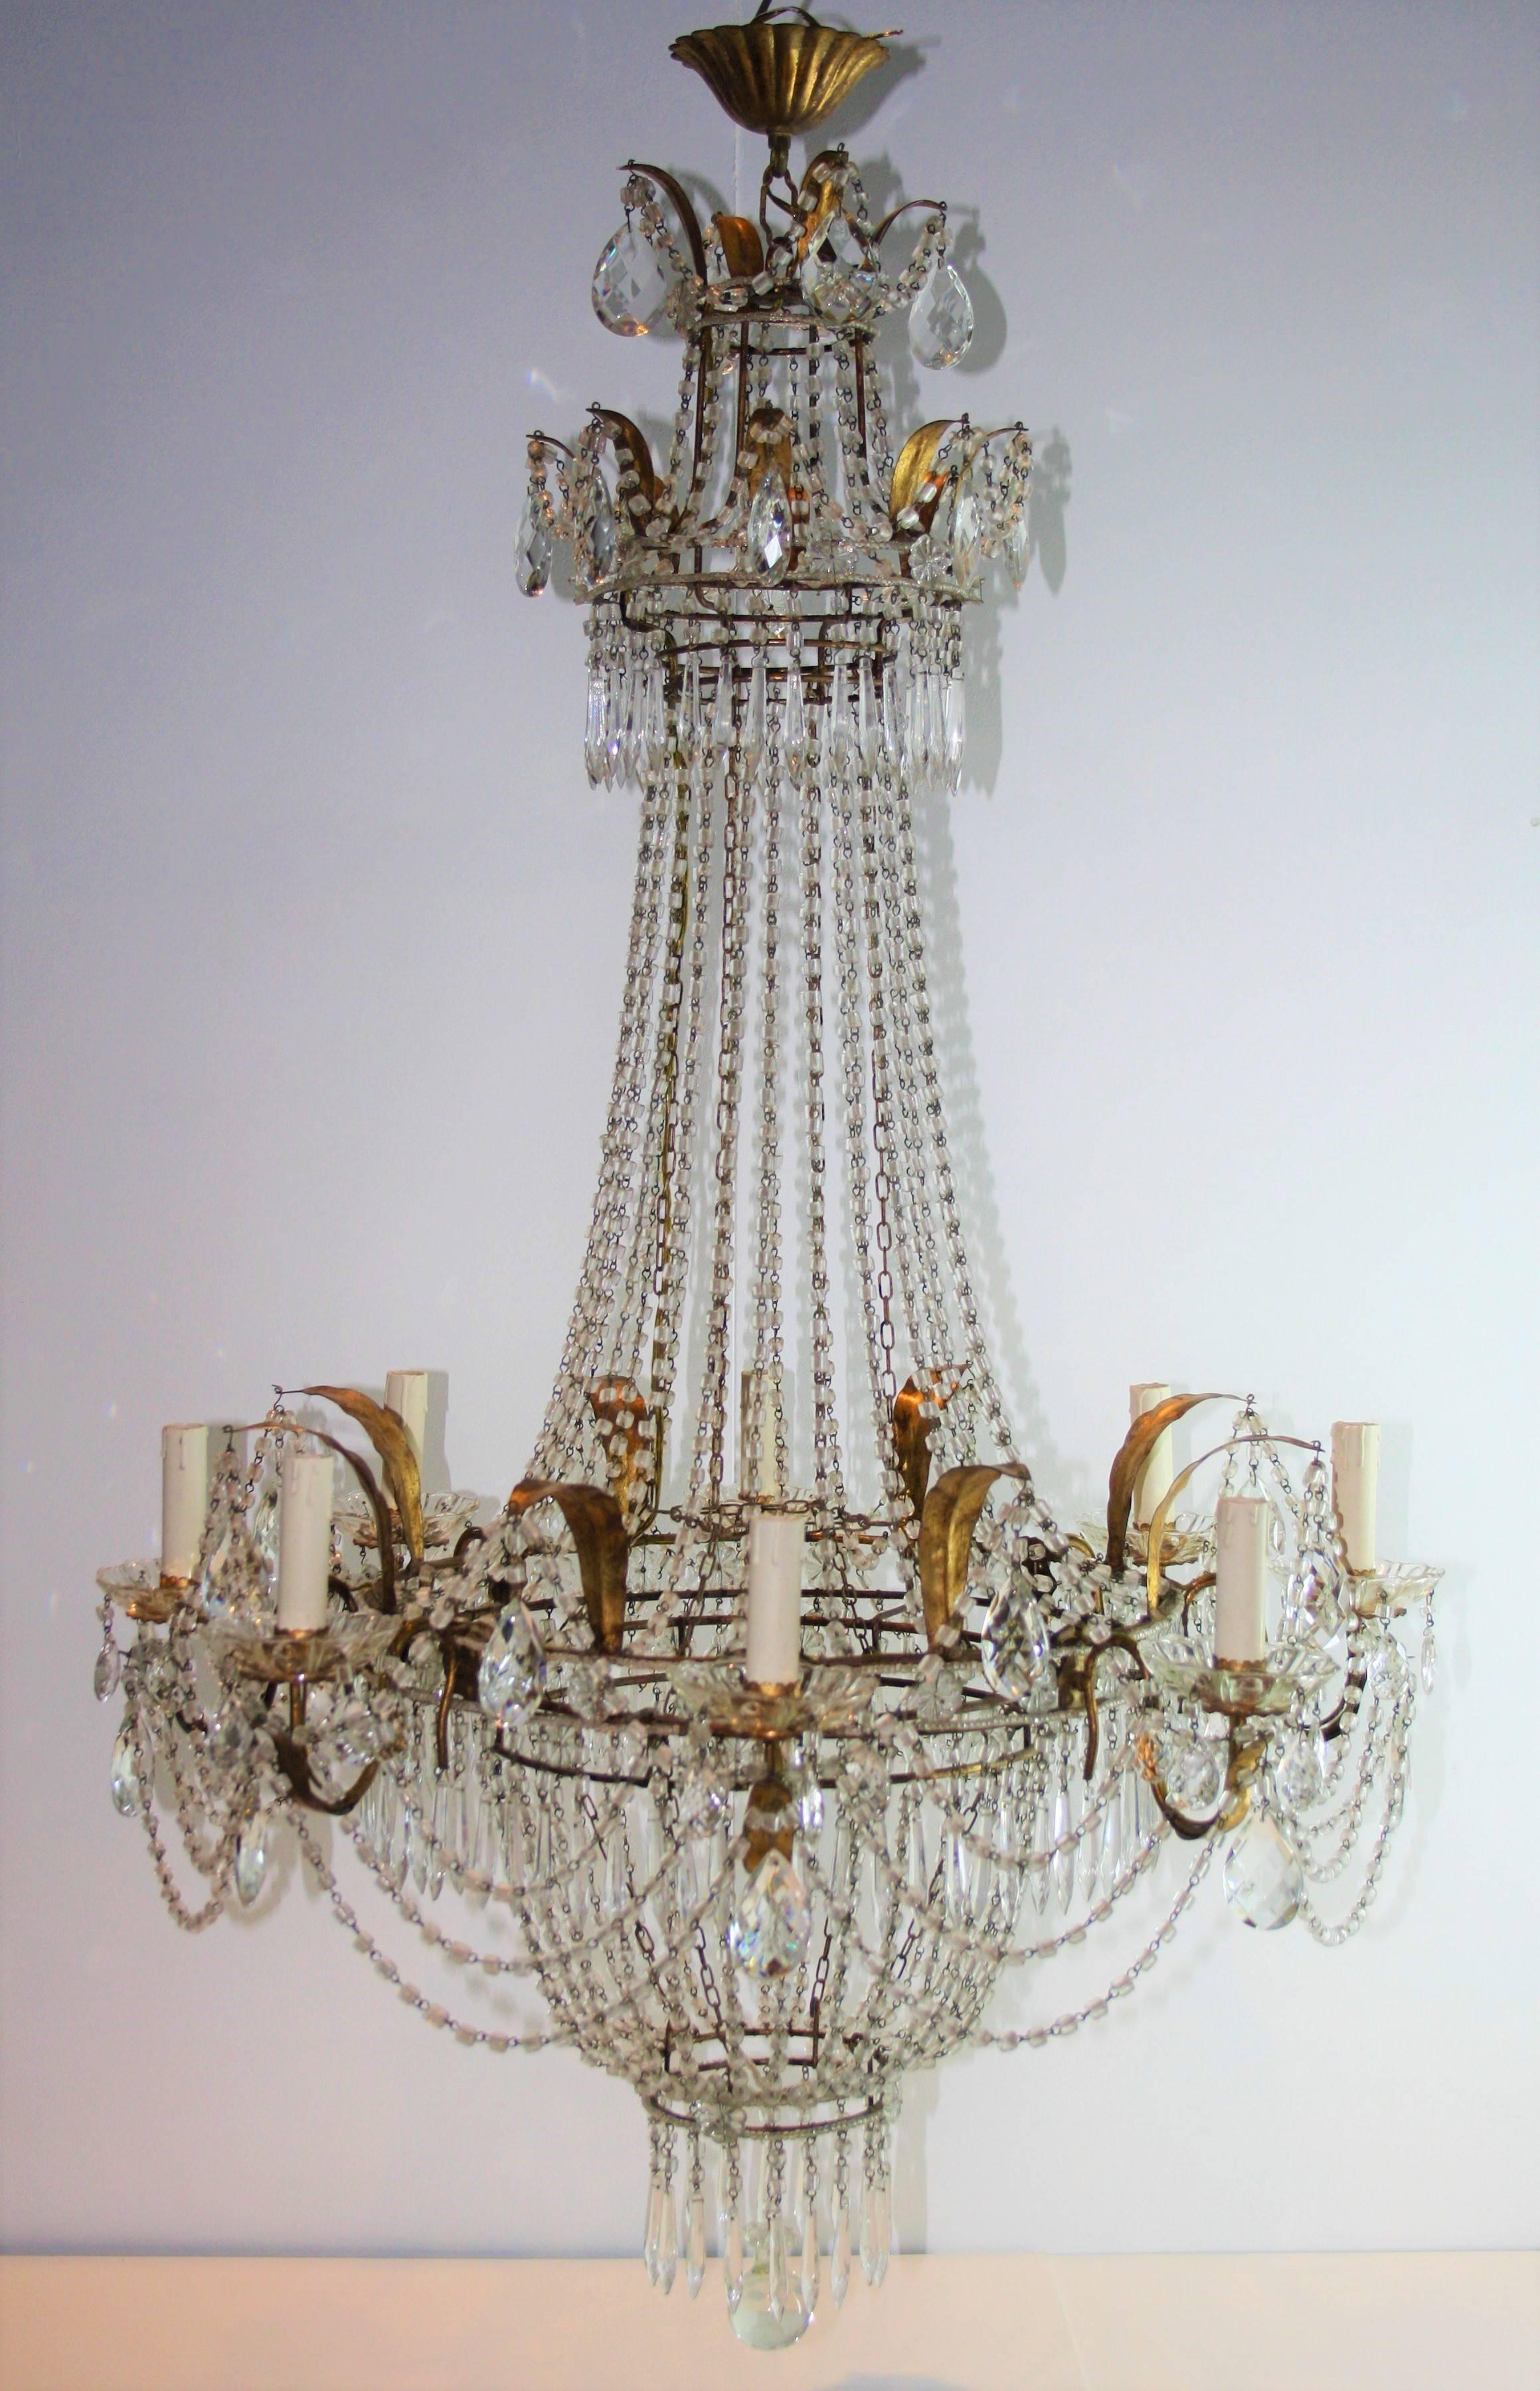 Large very refined and elegant French chandelier Empire style, gilded metal and crystal.
The electricity has been fully verified by our Team and is suitable for US.
